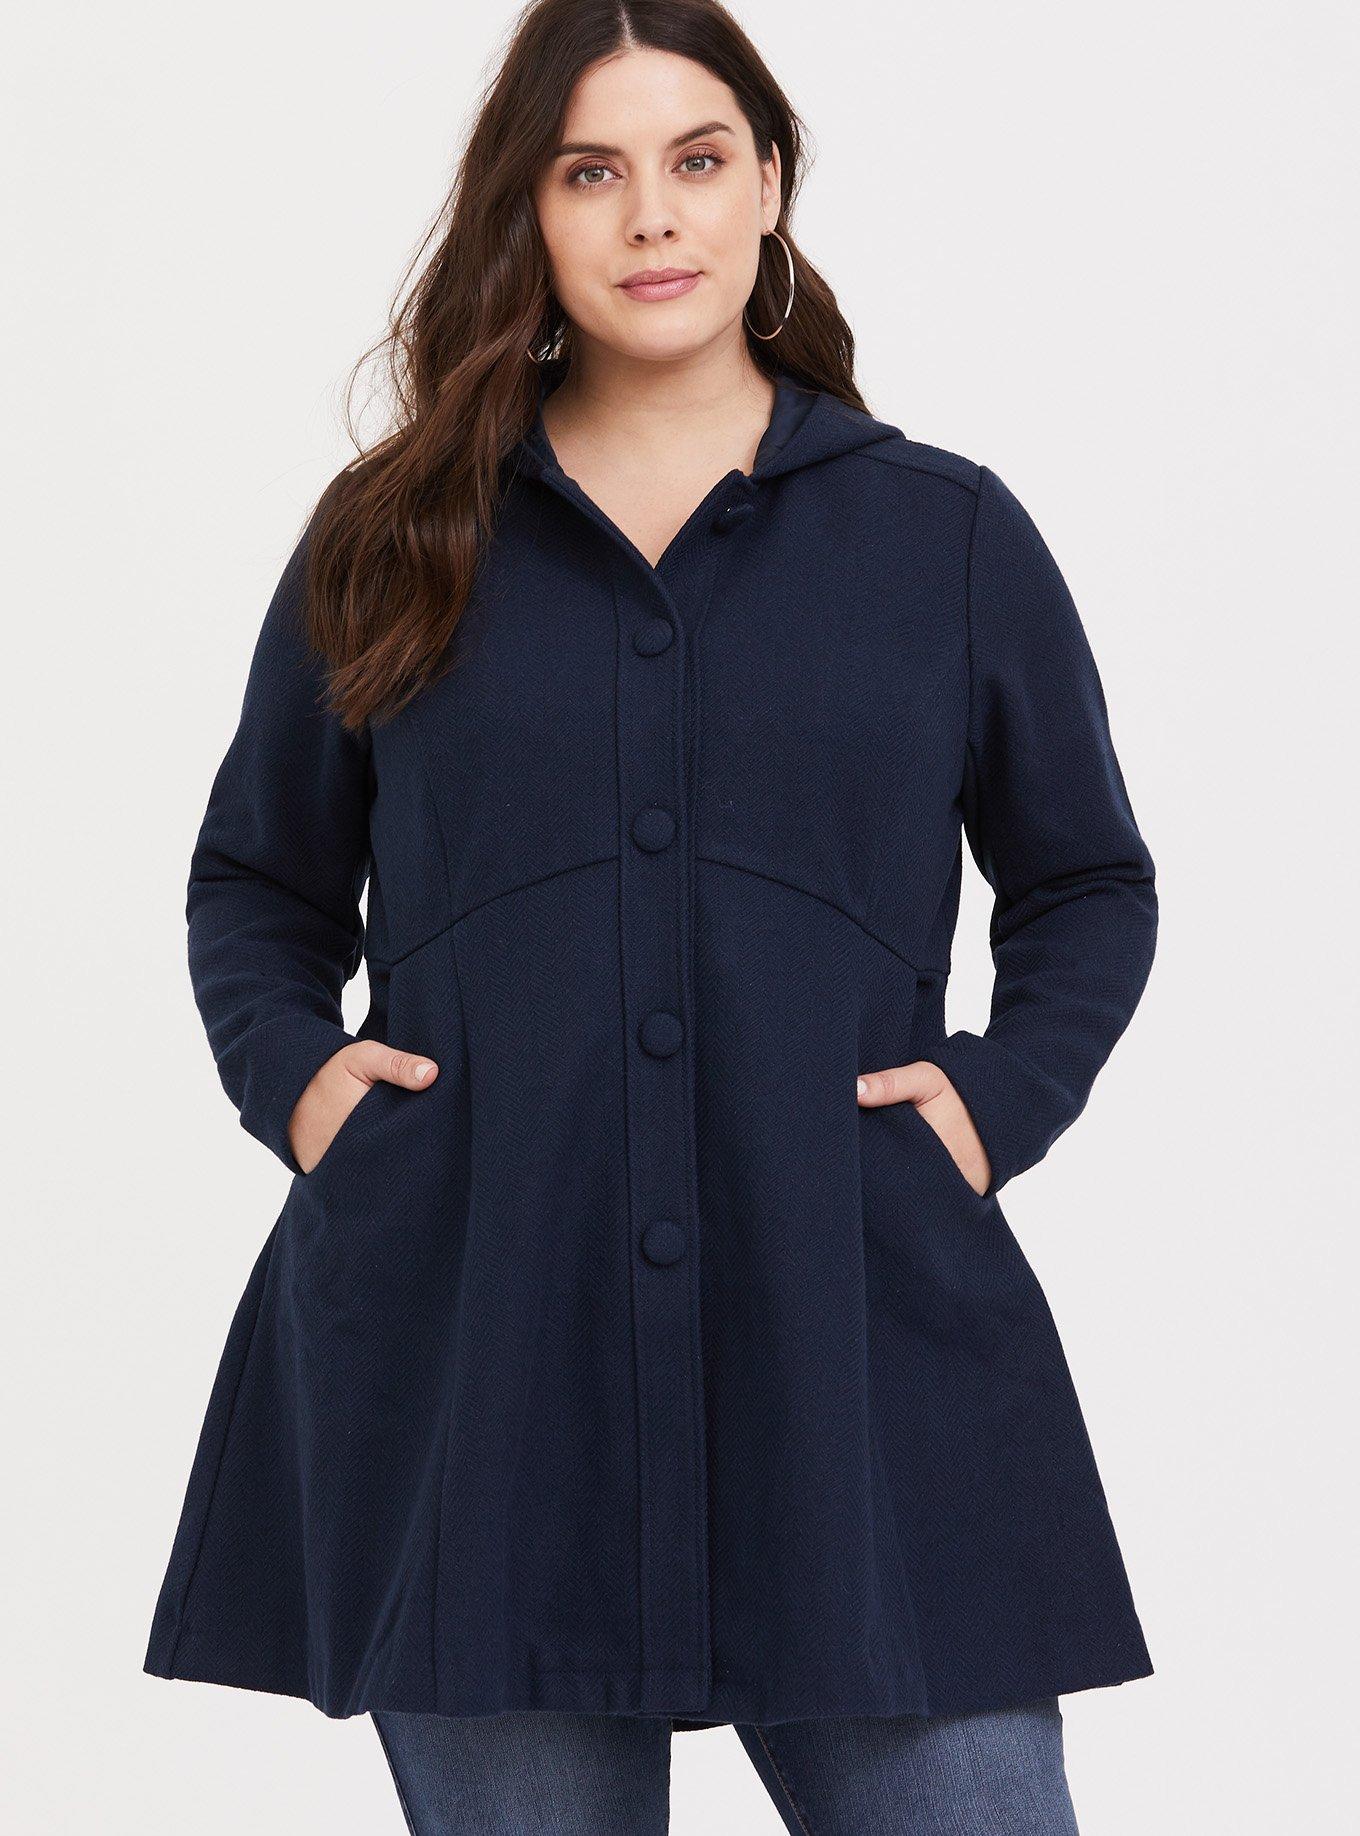 Plus Size - Fit And Flare Coat With Hood - Torrid